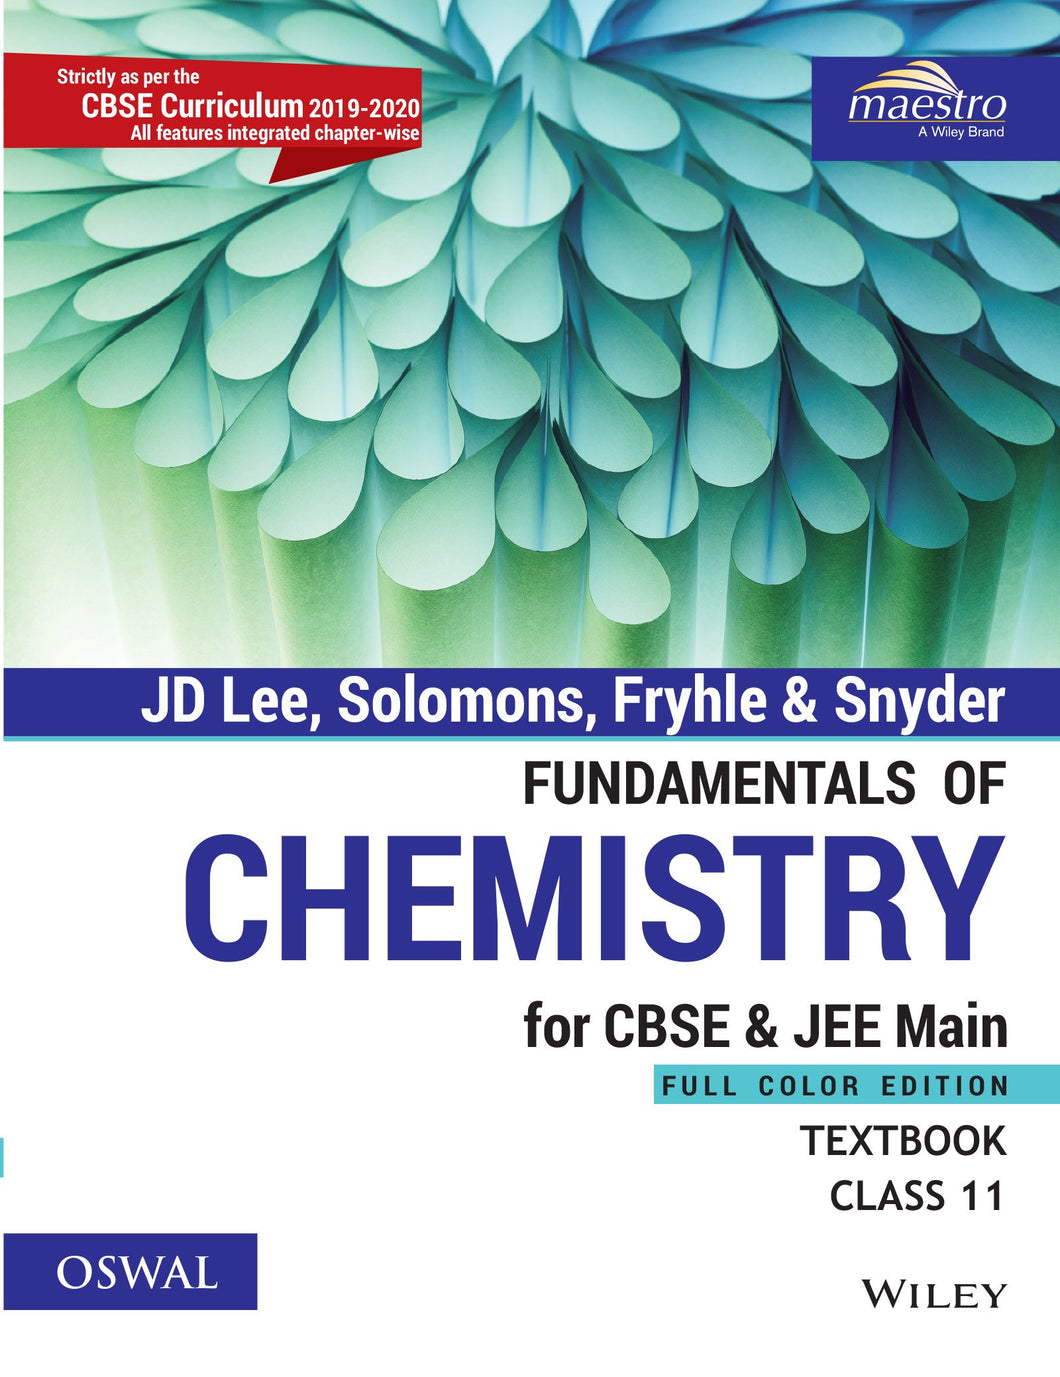 Oswal Fundamentals of Chemistry: CBSE Class 11 (CBSE & JEE Main) - Set of Textbook & Practice Book